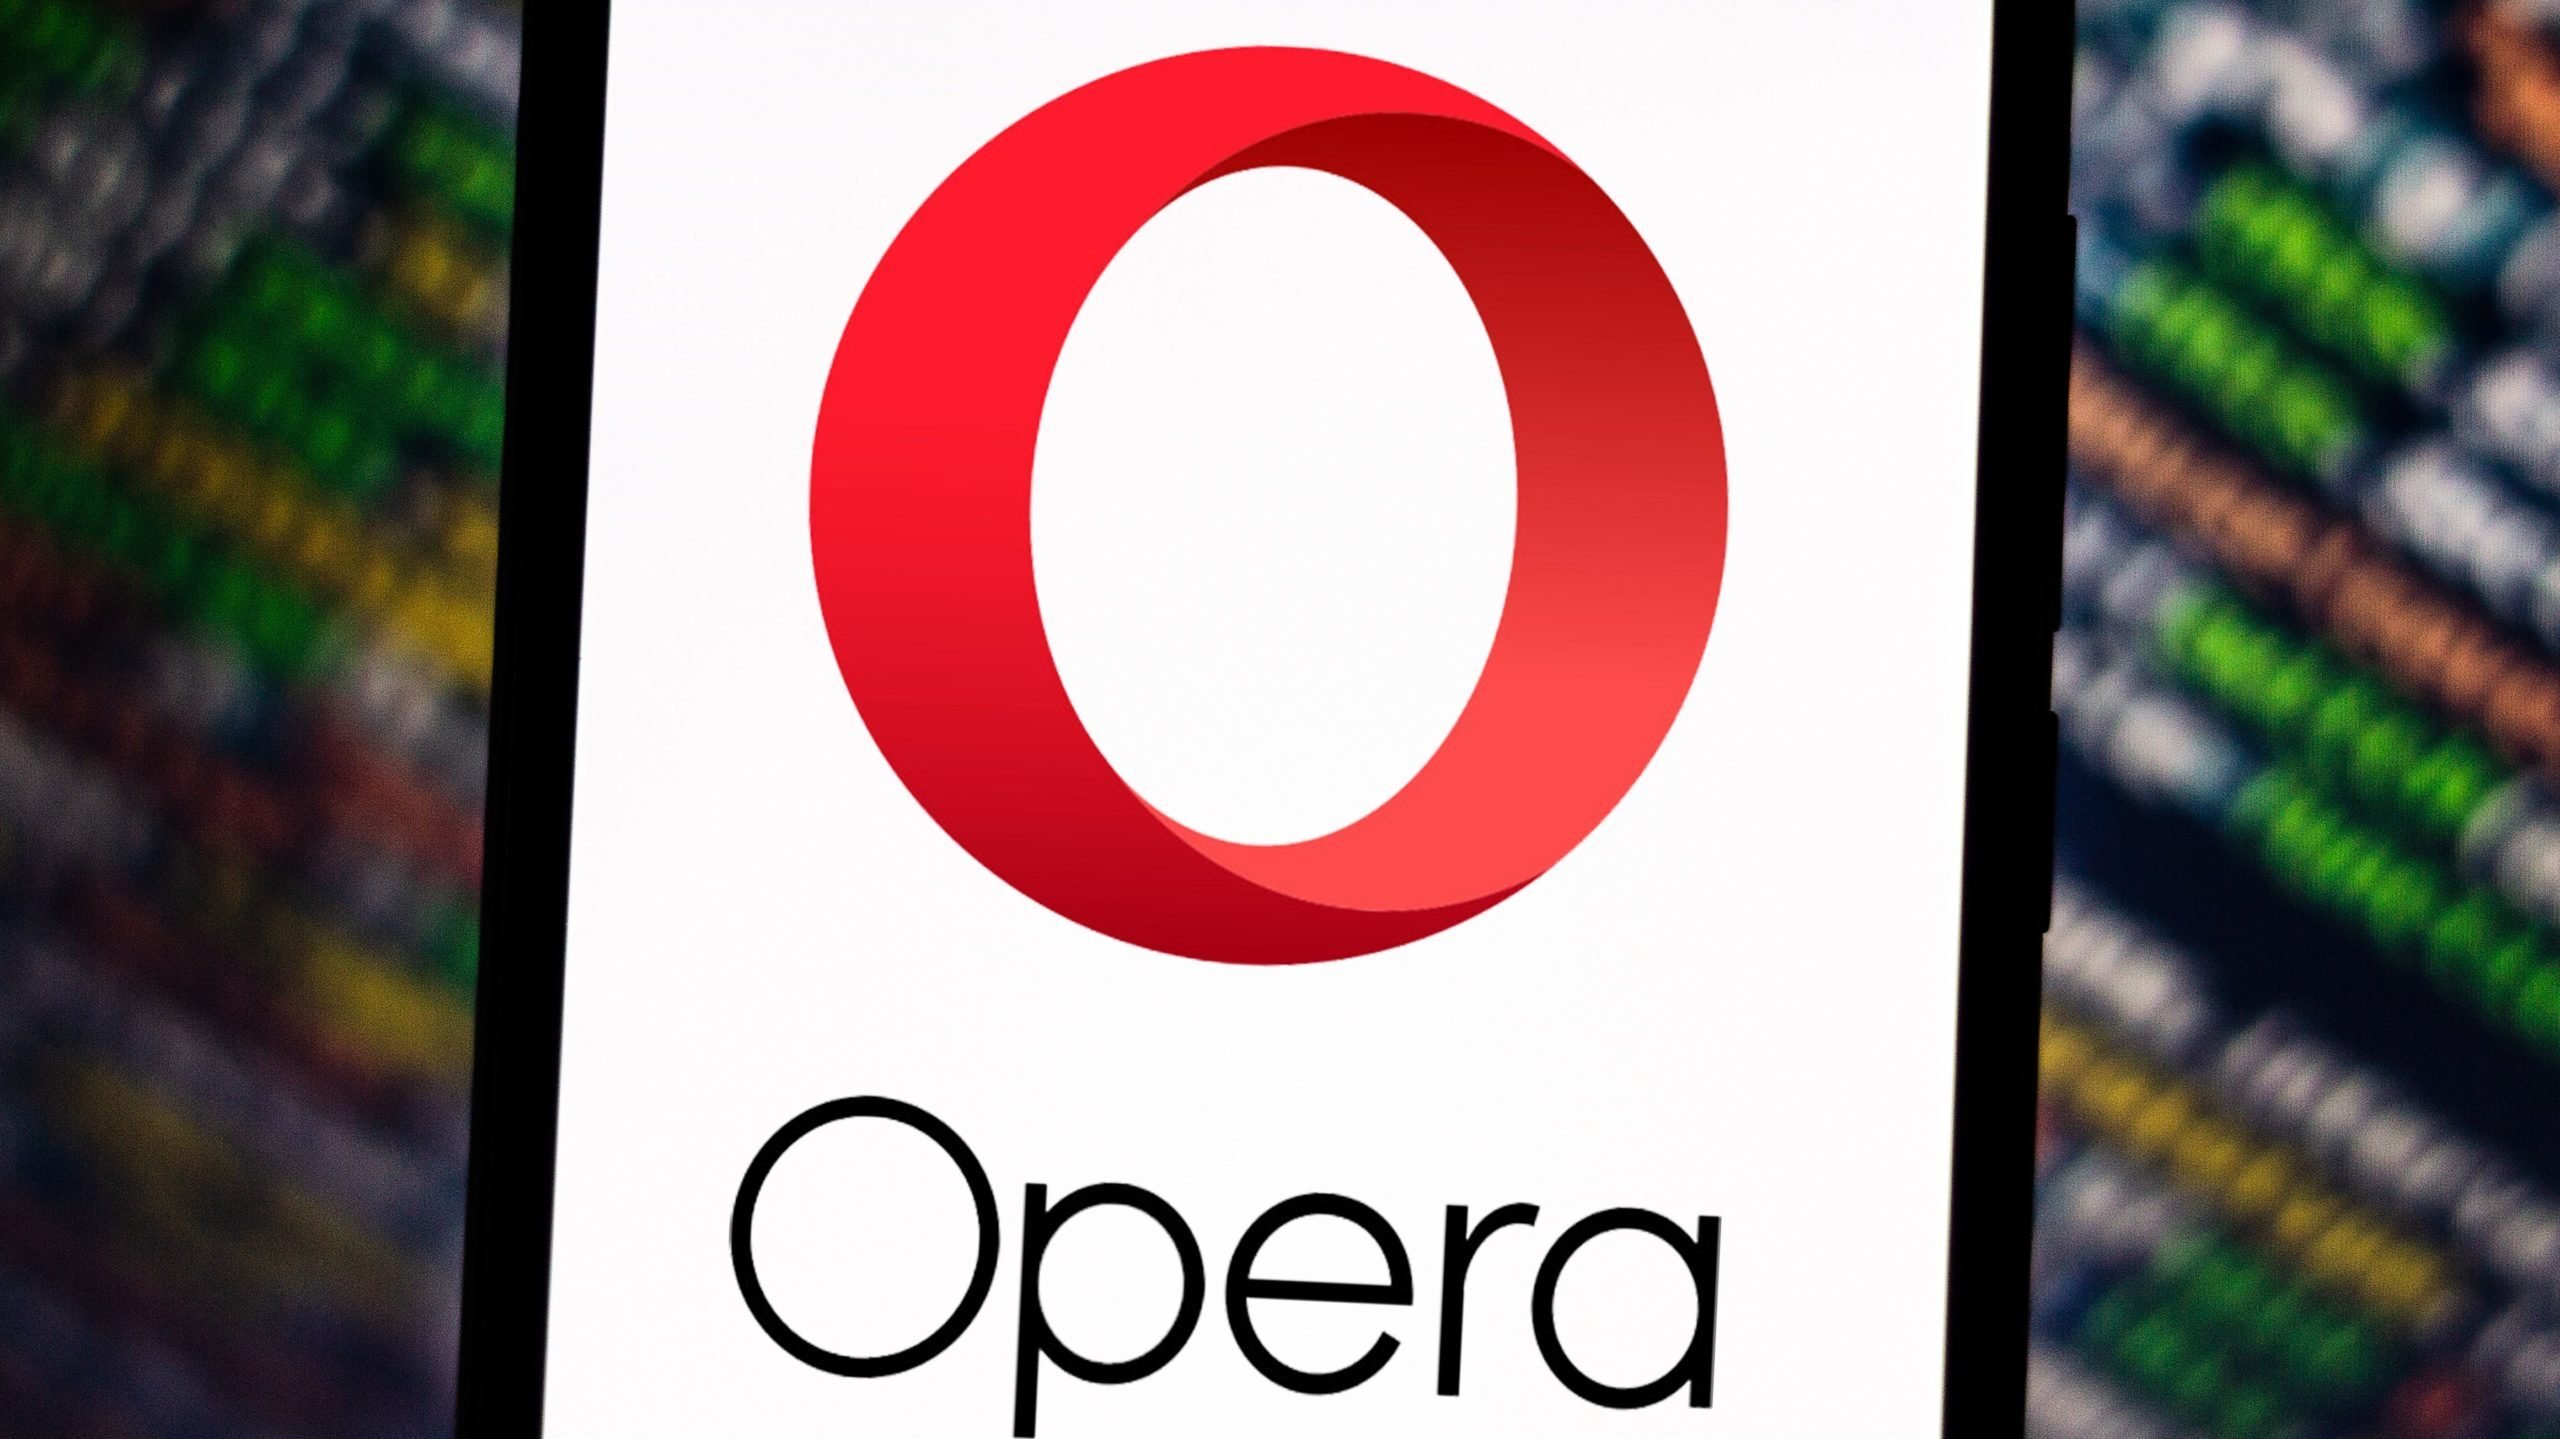 Opera Adopts Google Gemini to Power Its Browser AI Assistant, Image Generator